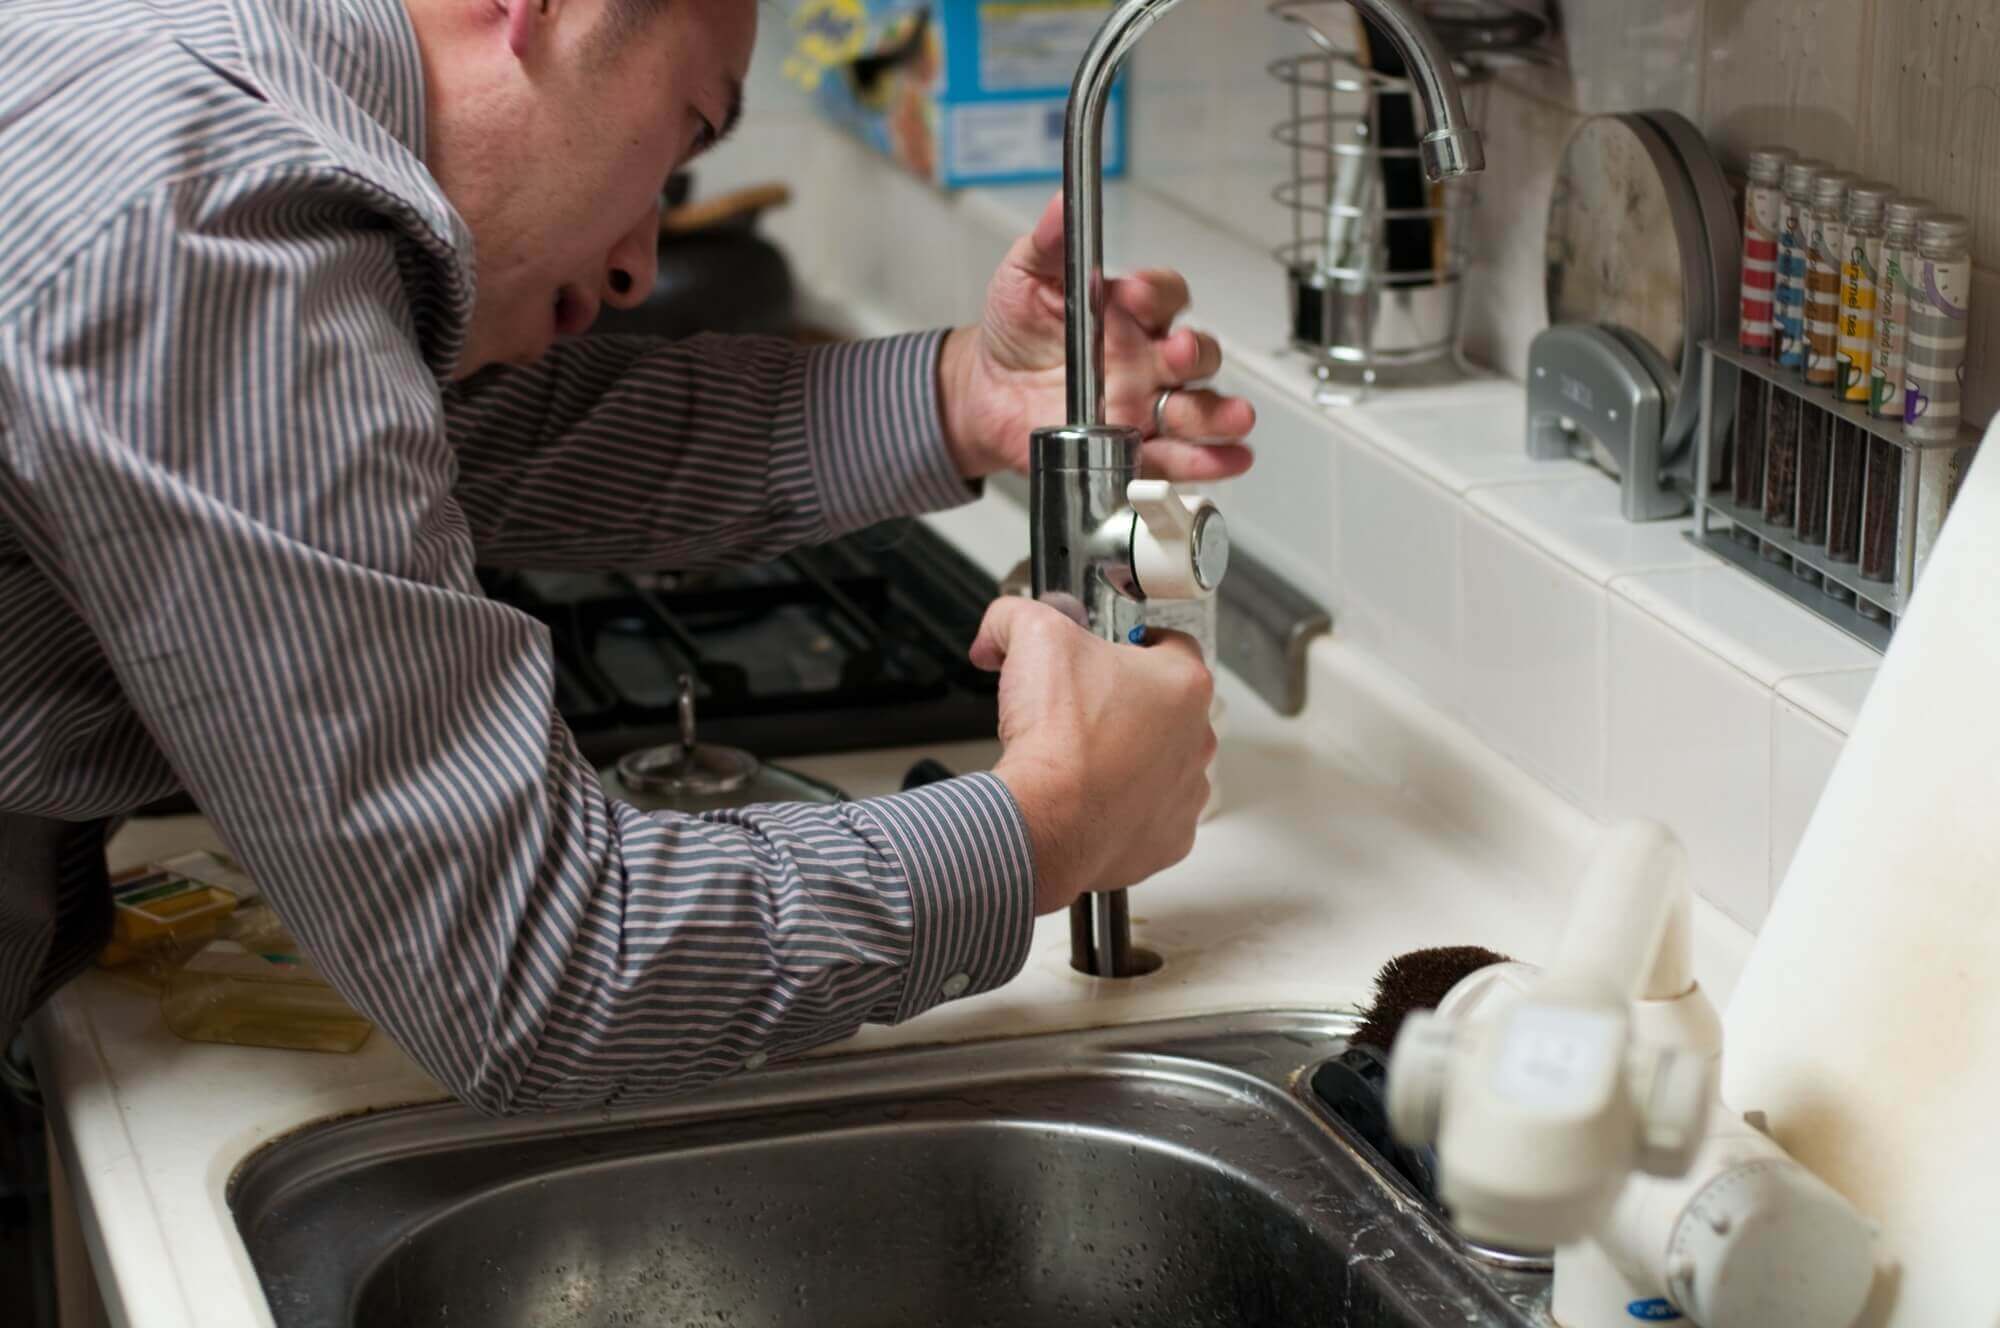 Important Questions to Ask a Plumber Before Hiring